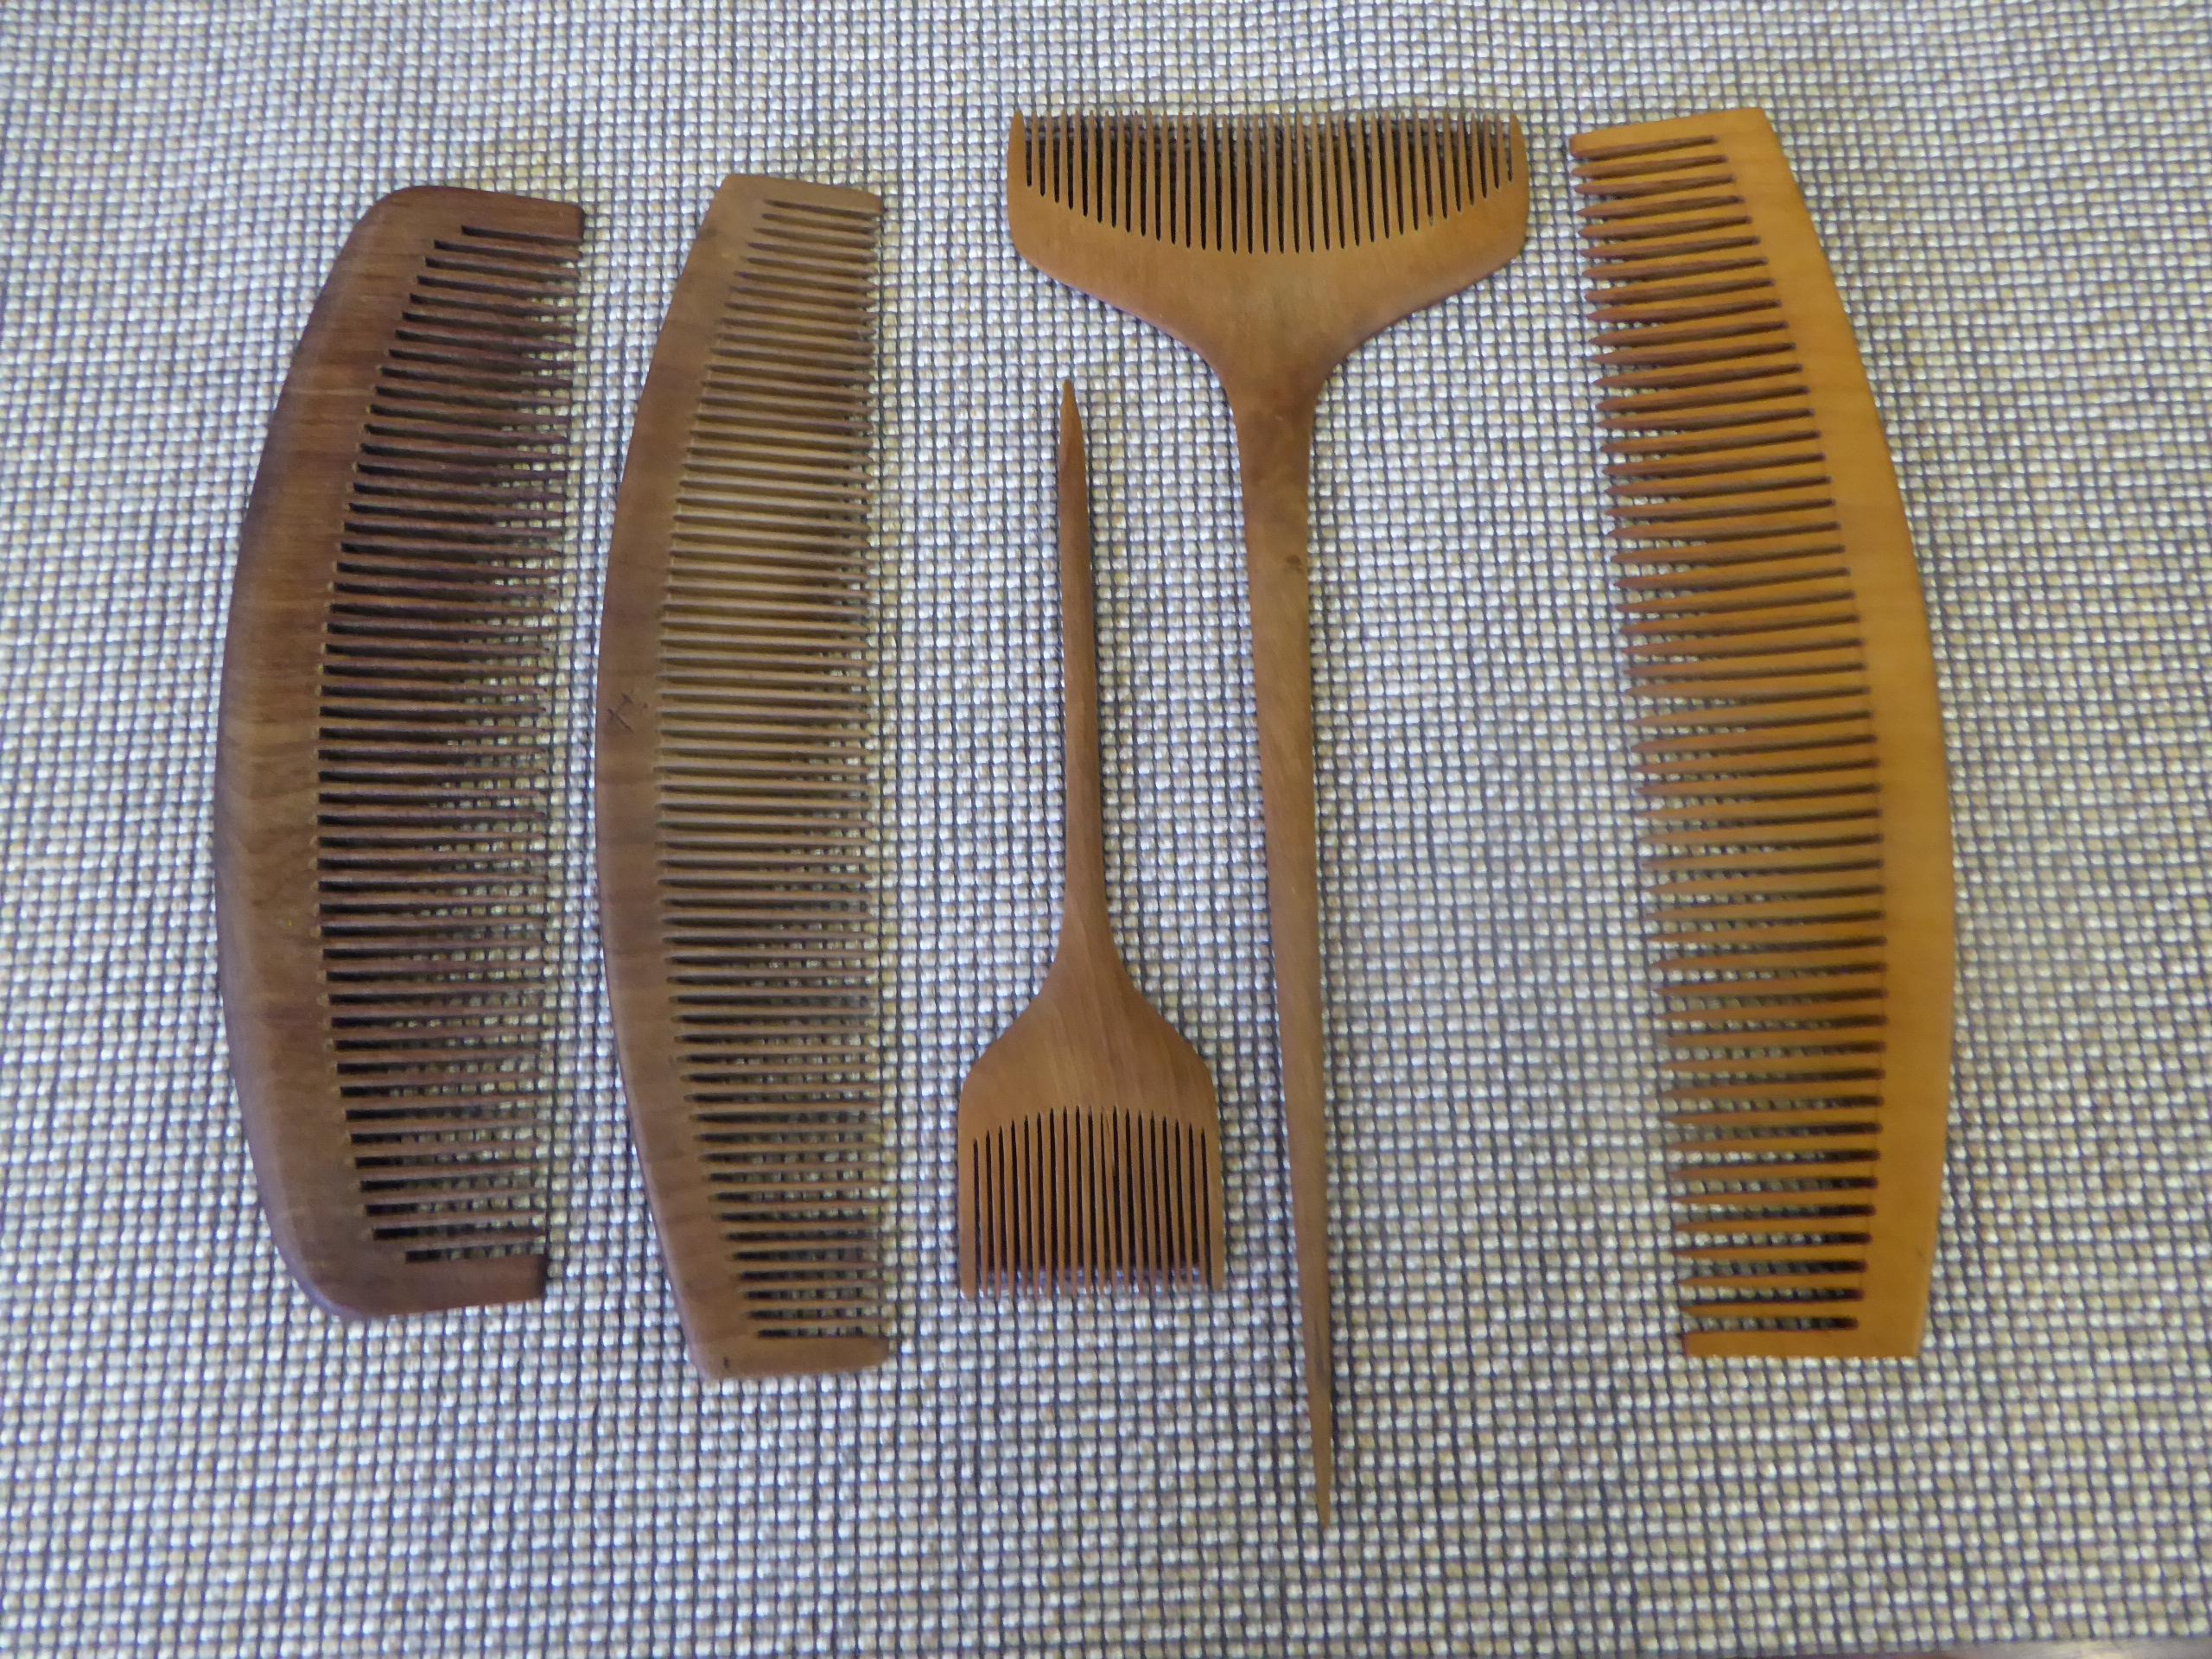 Found in Kamakura, this collection of 5 Vintage Japanese combs are from the 1930s, possibly older and are carved of Tsunge or boxwood. Beautiful age patina, all in very good condition.
Comb measurements: The 2 long handled Nihongami combs are 8